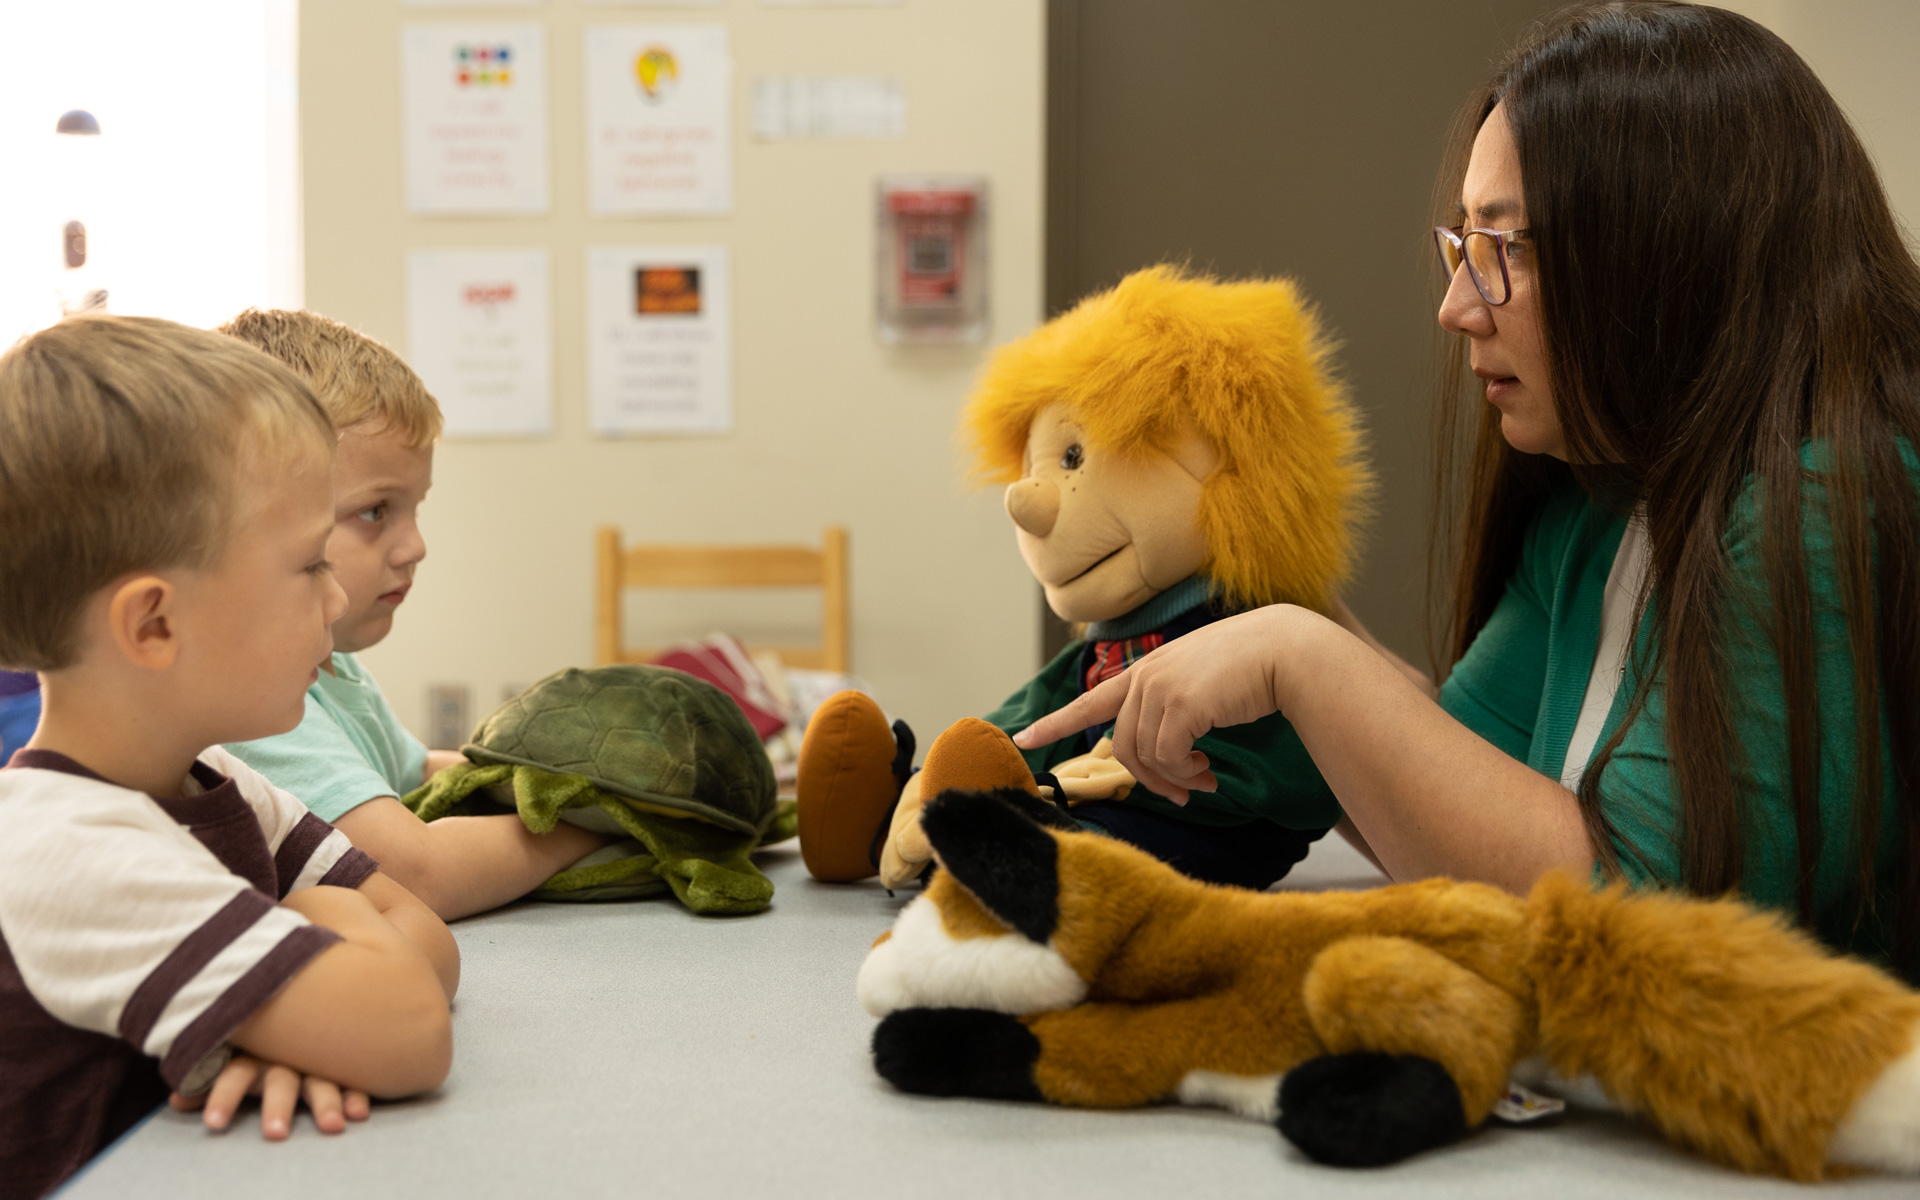 Female staff member uses stuffed animal to do the Happy Bear presentation for two young boys